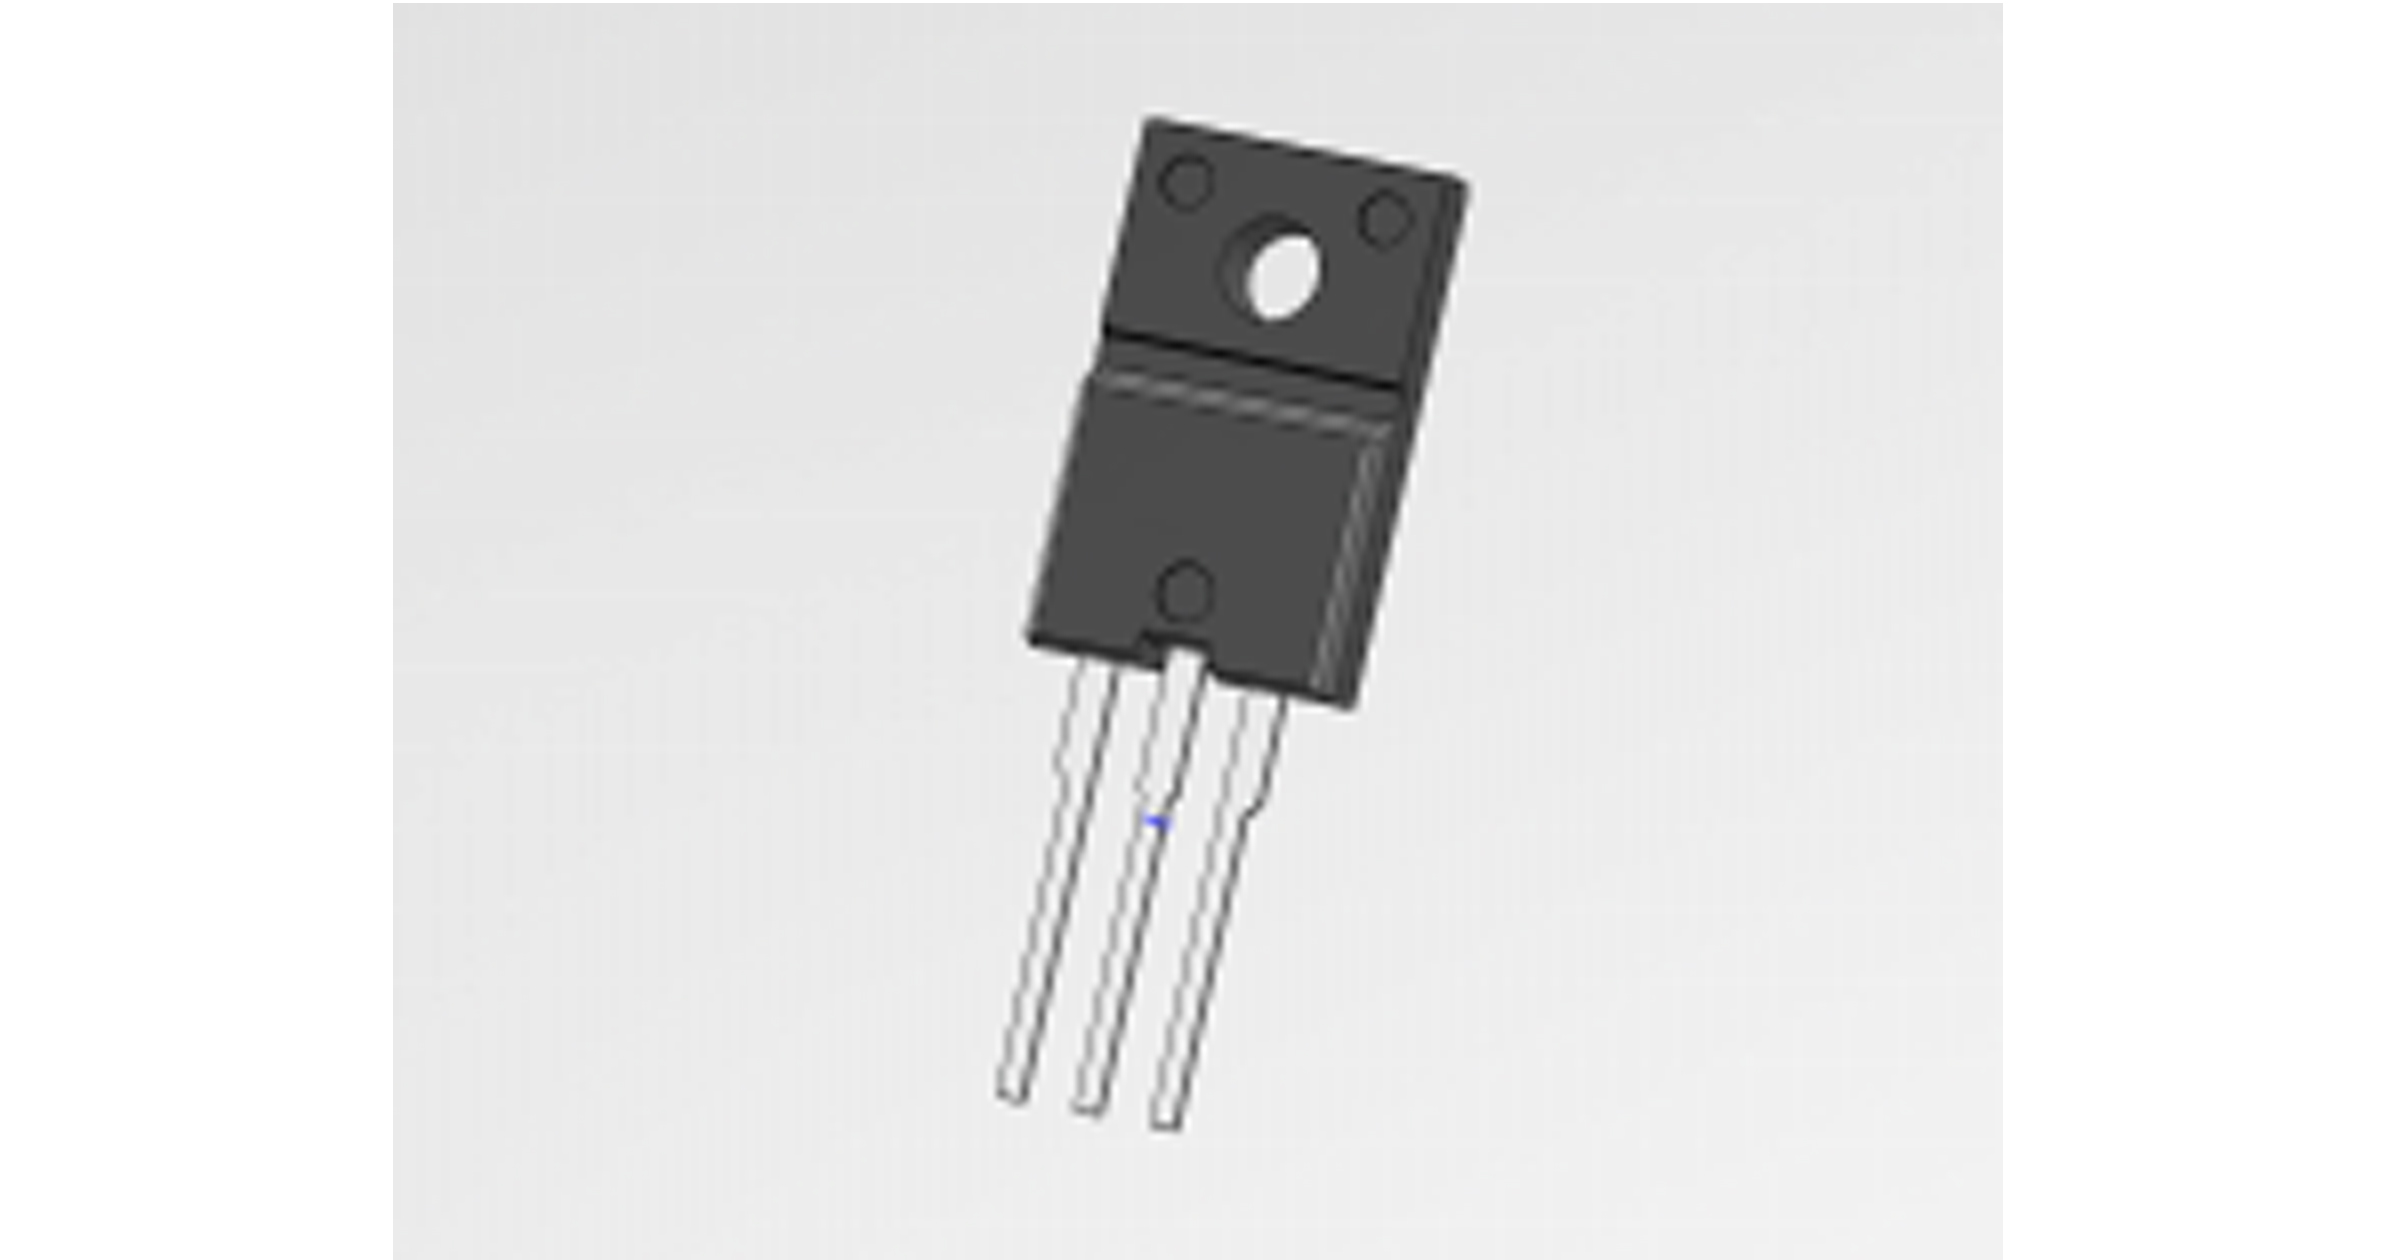 Vol.049：弊社取扱いメーカーMOSFET